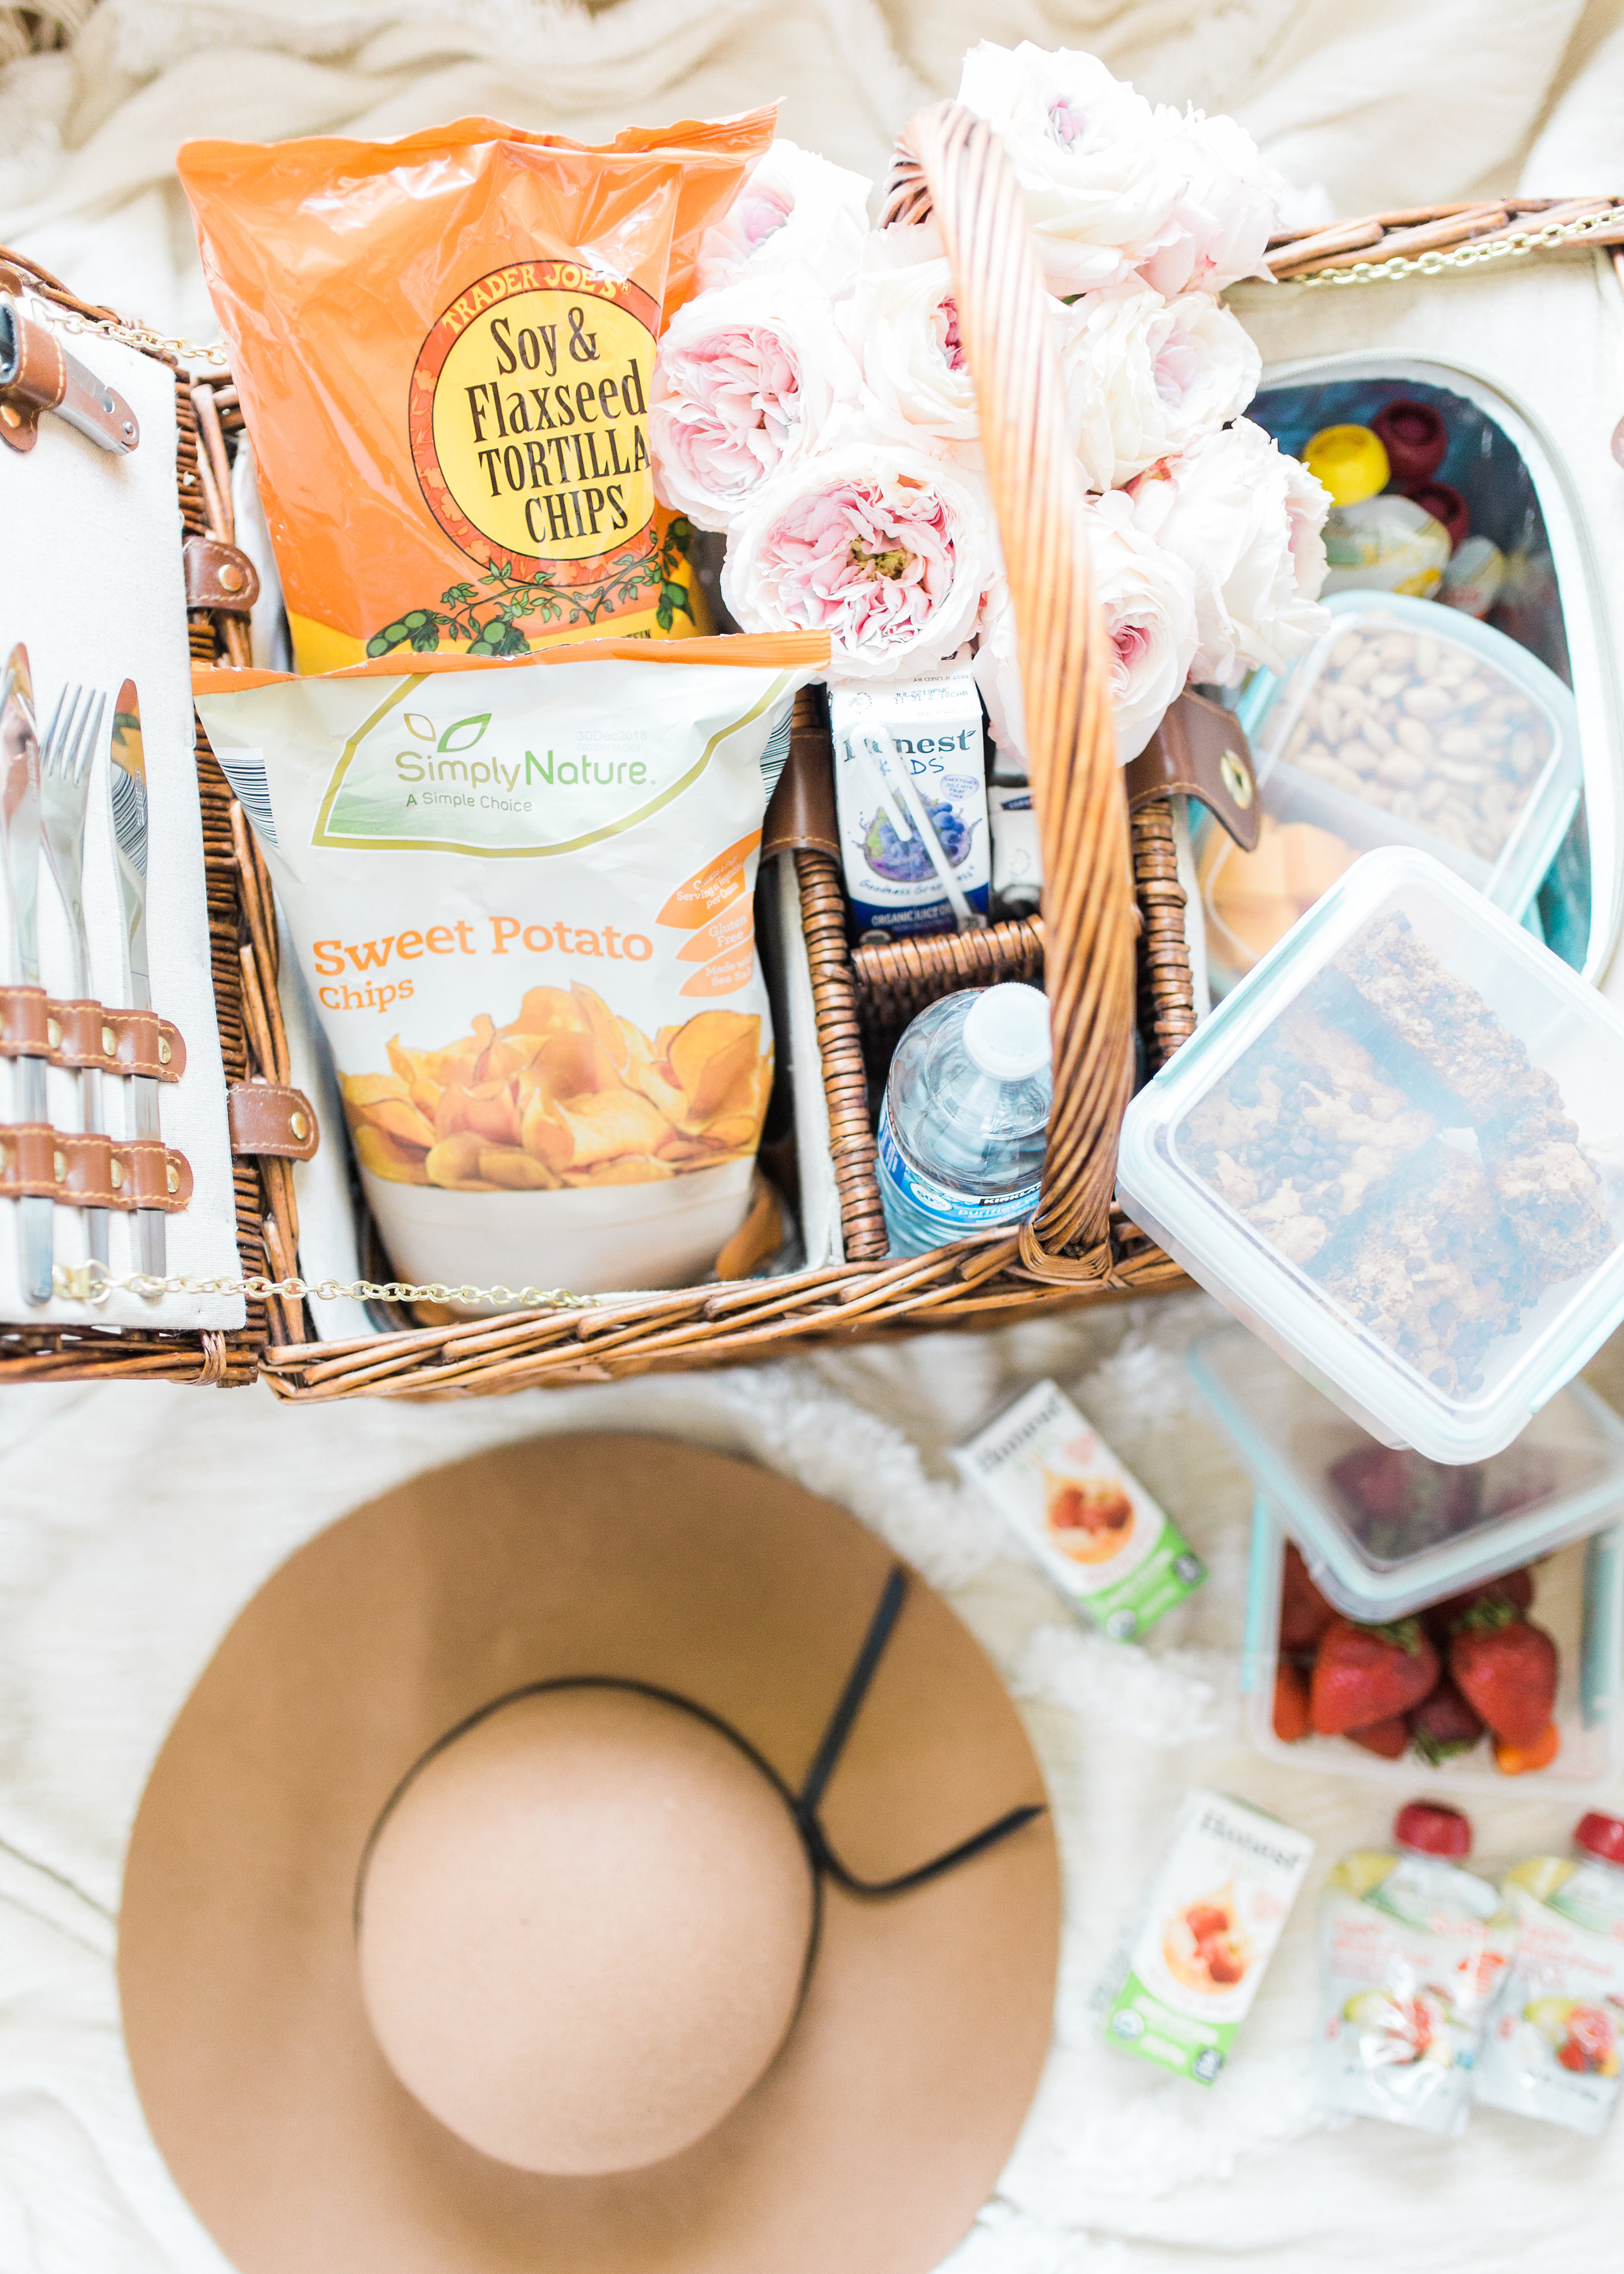  the best snacks for the whole family  #roadtripsnacks #familyroadtrip #vacation #travel #travelwithkids #familytravel #familyvacation Click through for the details. | glitterinc.com | @glitterinc